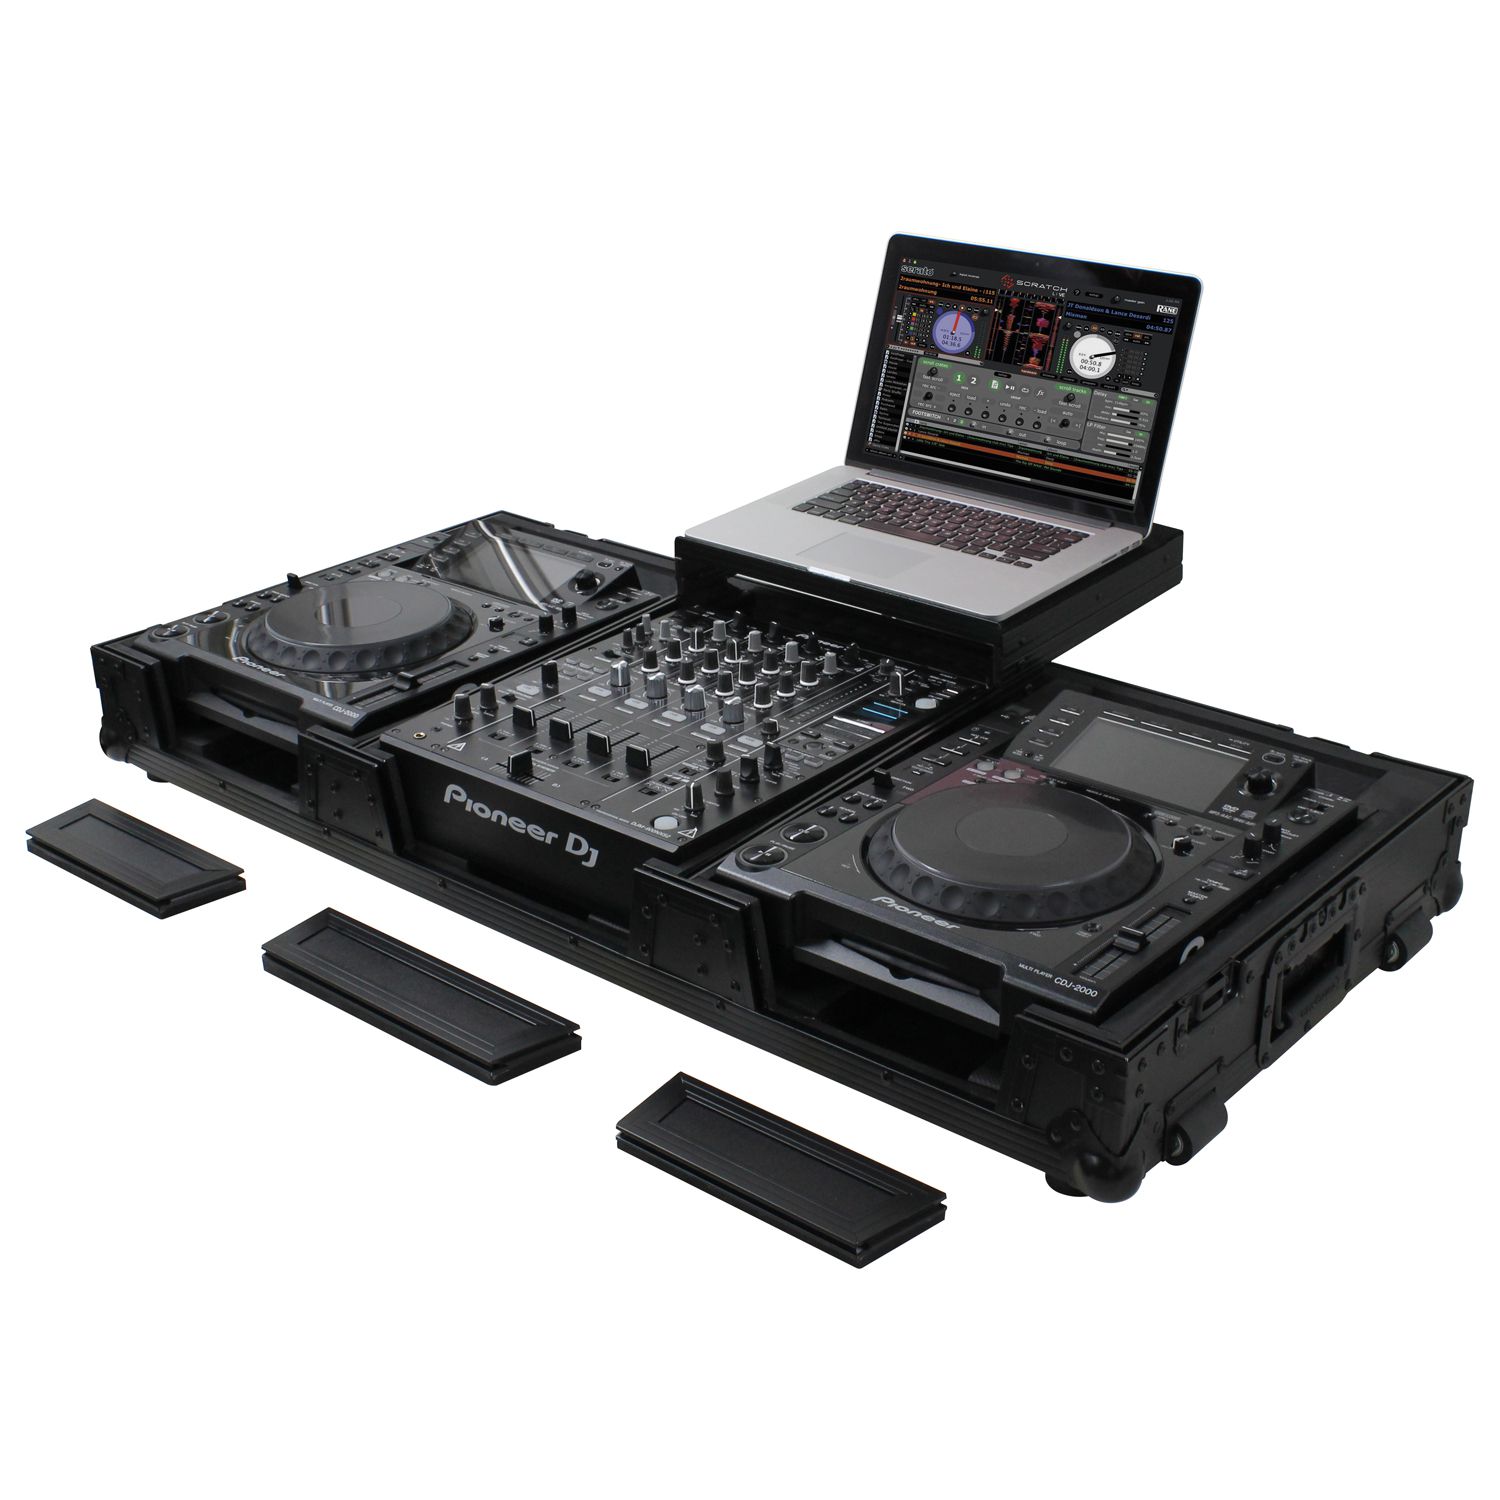 Odyssey FZGSDJ19W Flight Zone Glide Style Ata Dj Coffin With Wheels For A 19 Mixer & Two Turntables In Standard Position 